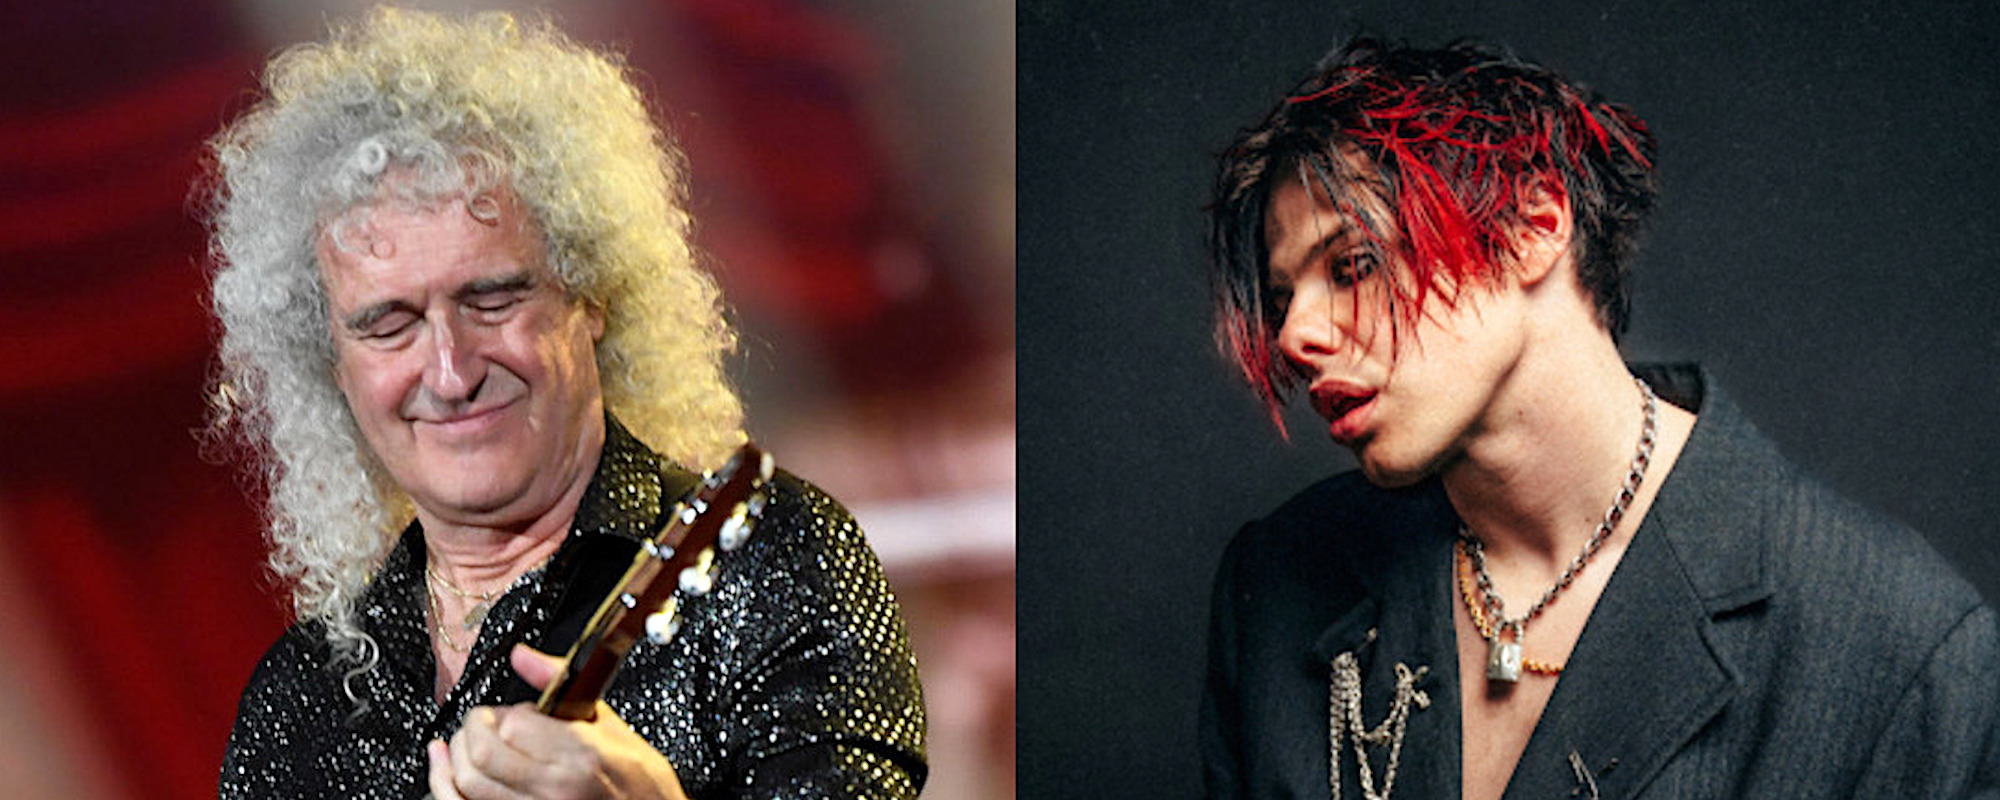 Brian May Defends Yungblud’s Cover of Queen Classic “We Are the Champions”